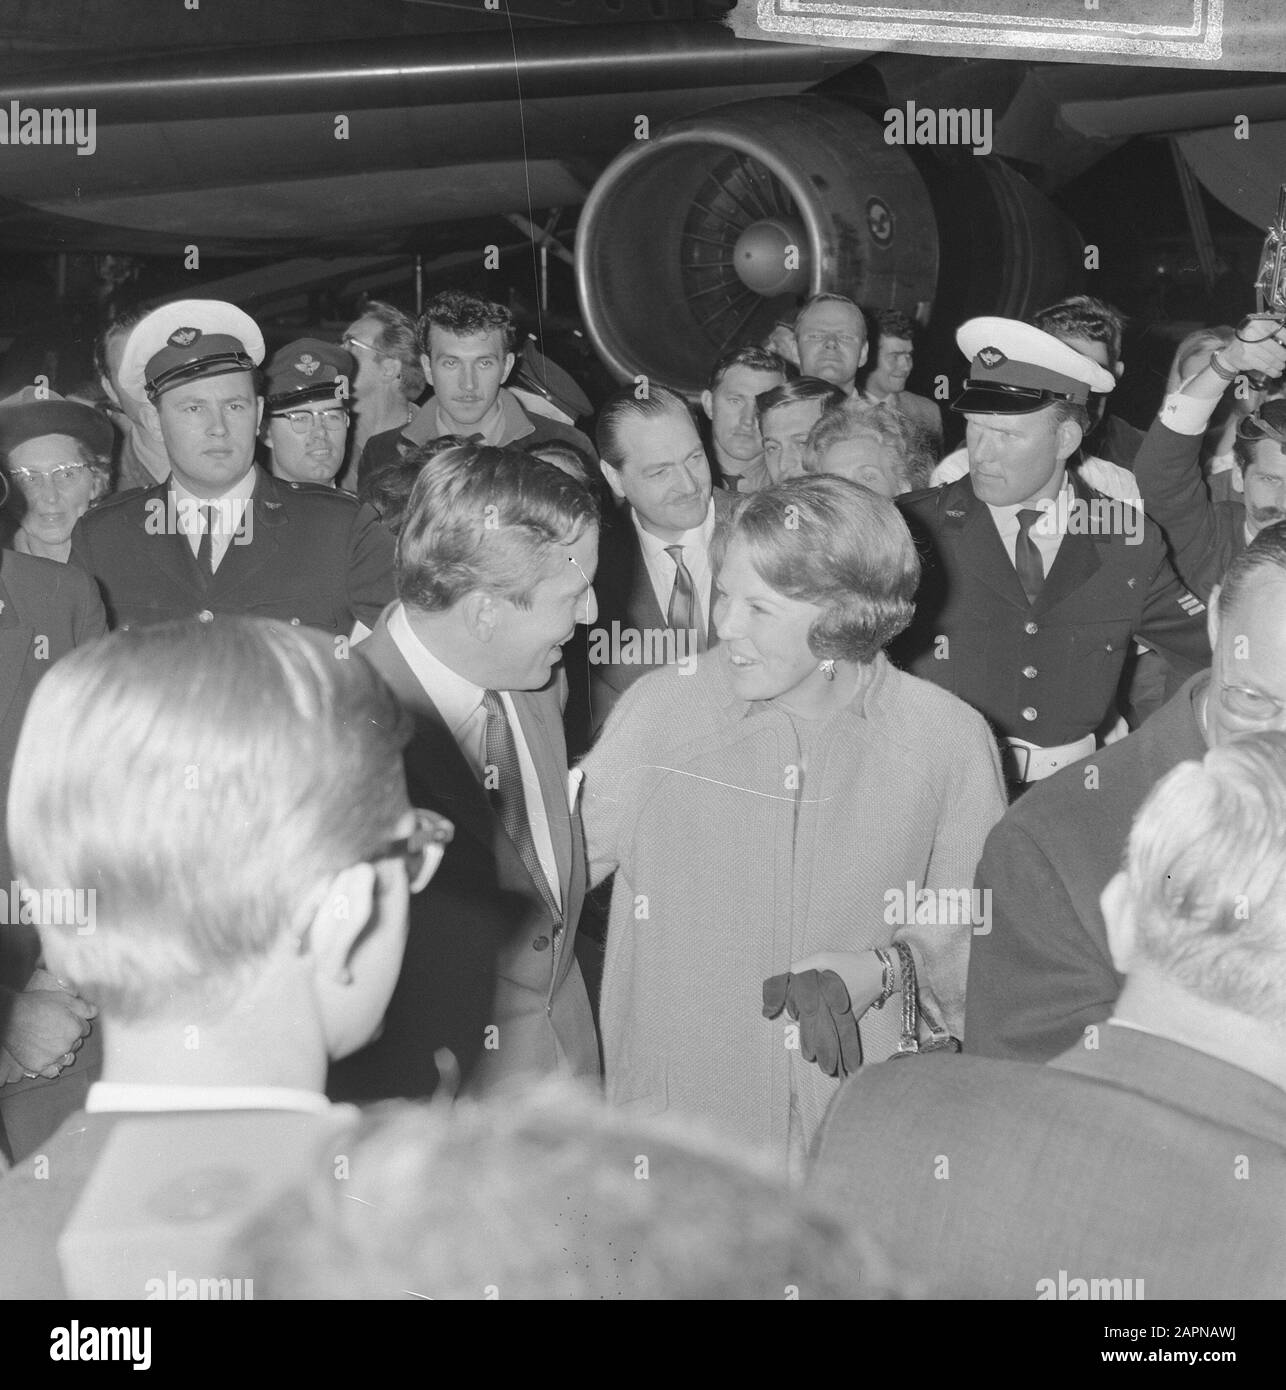 Queen Juliana and Prince Bernhard during their arrival at Schiphol Airport after a royal visit to Suriname  Princess Beatrix and her fiancée Claus von Amsberg Date: 16 October 1965 Location: Noord-Holland, Schiphol Keywords: arrival and departure, princesses Personal name: Beatrix, princess, Claus, prince Stock Photo